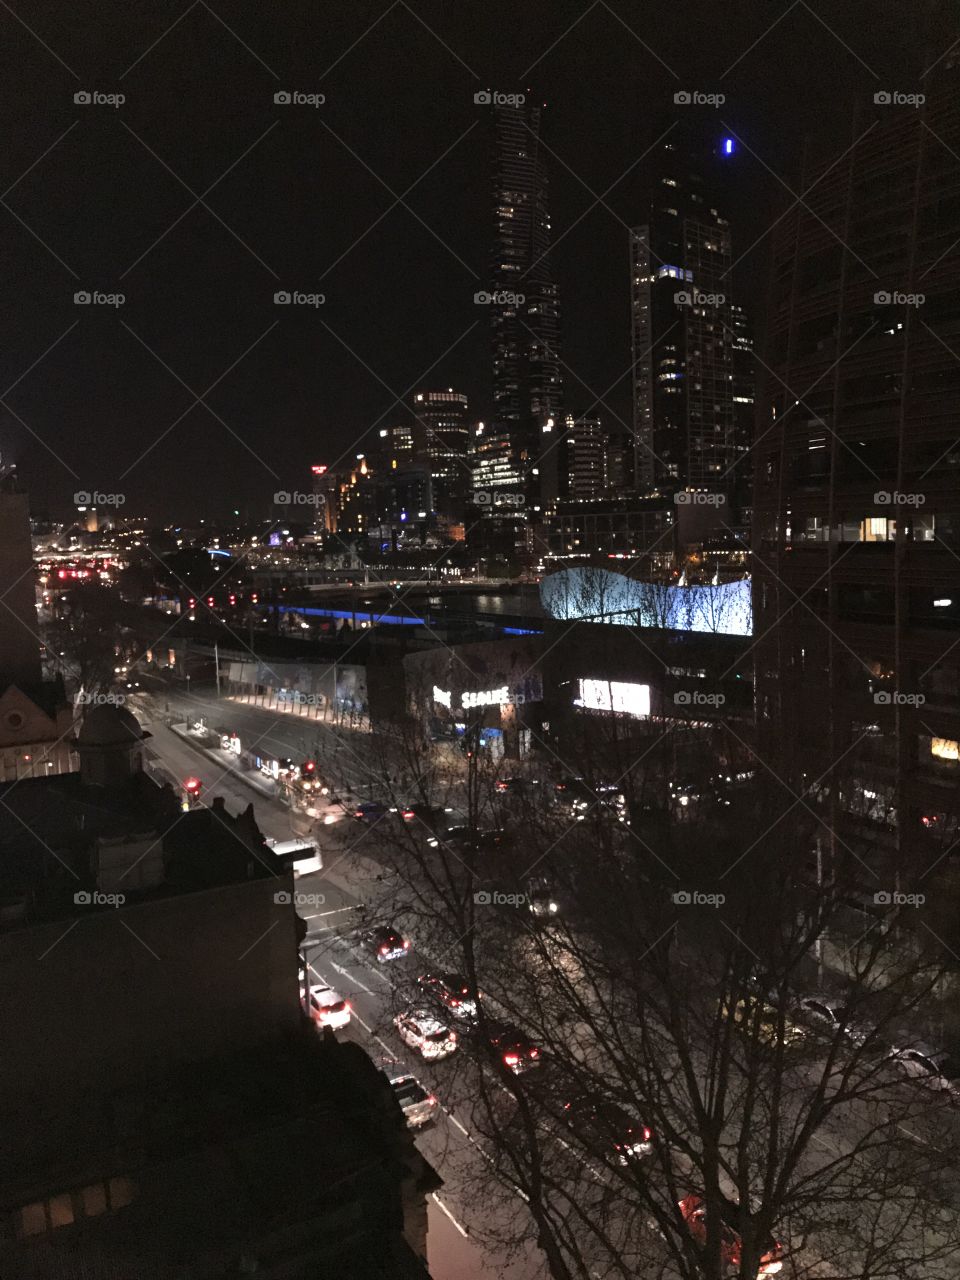 Melbourne city at night 